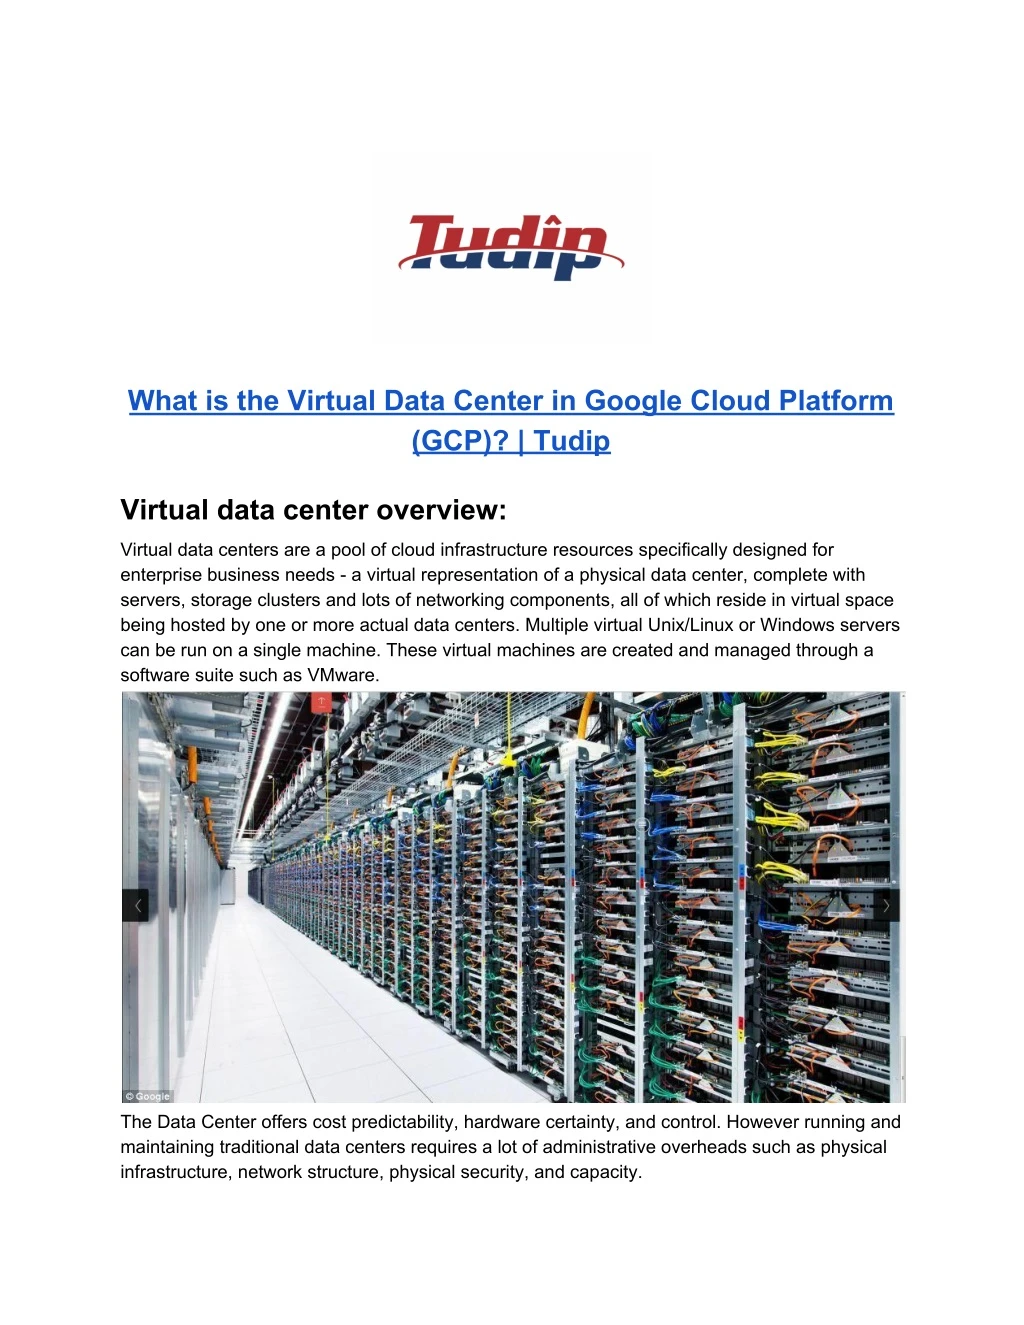 what is the virtual data center in google cloud